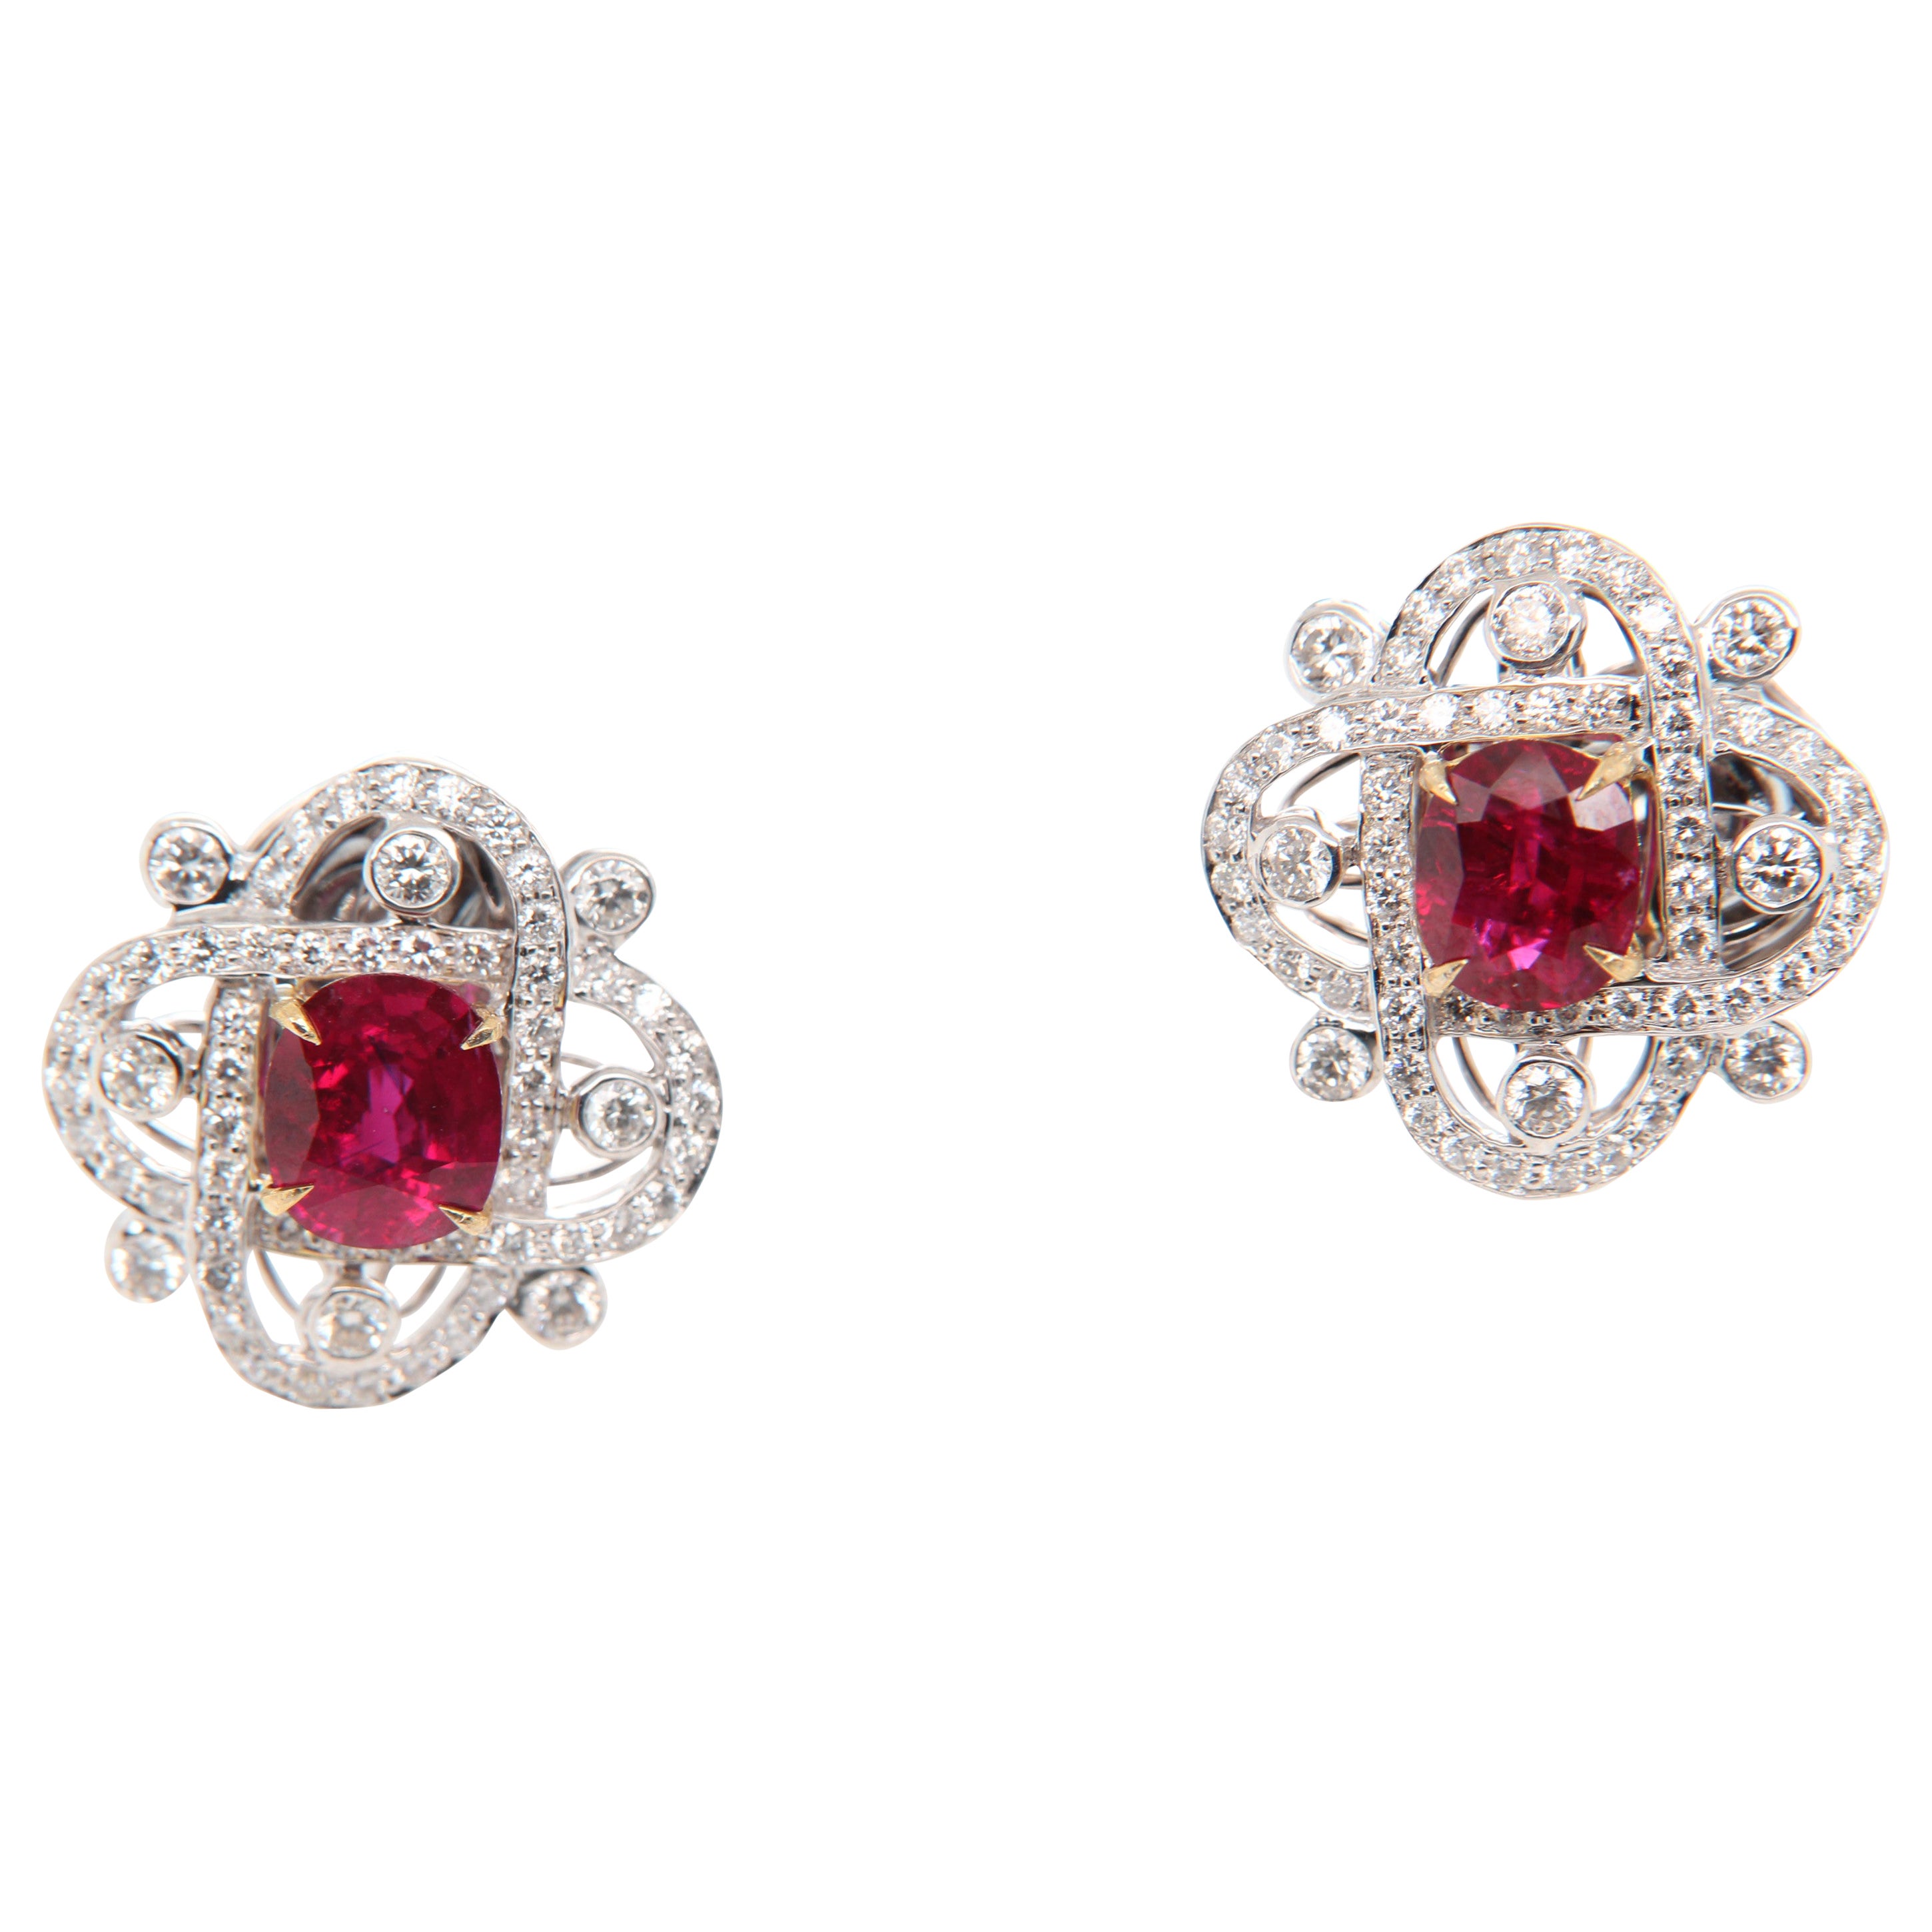 GRS Certified 3ct Burmese 'Pigeon Blood' Ruby and Diamond Earring in 18K Gold